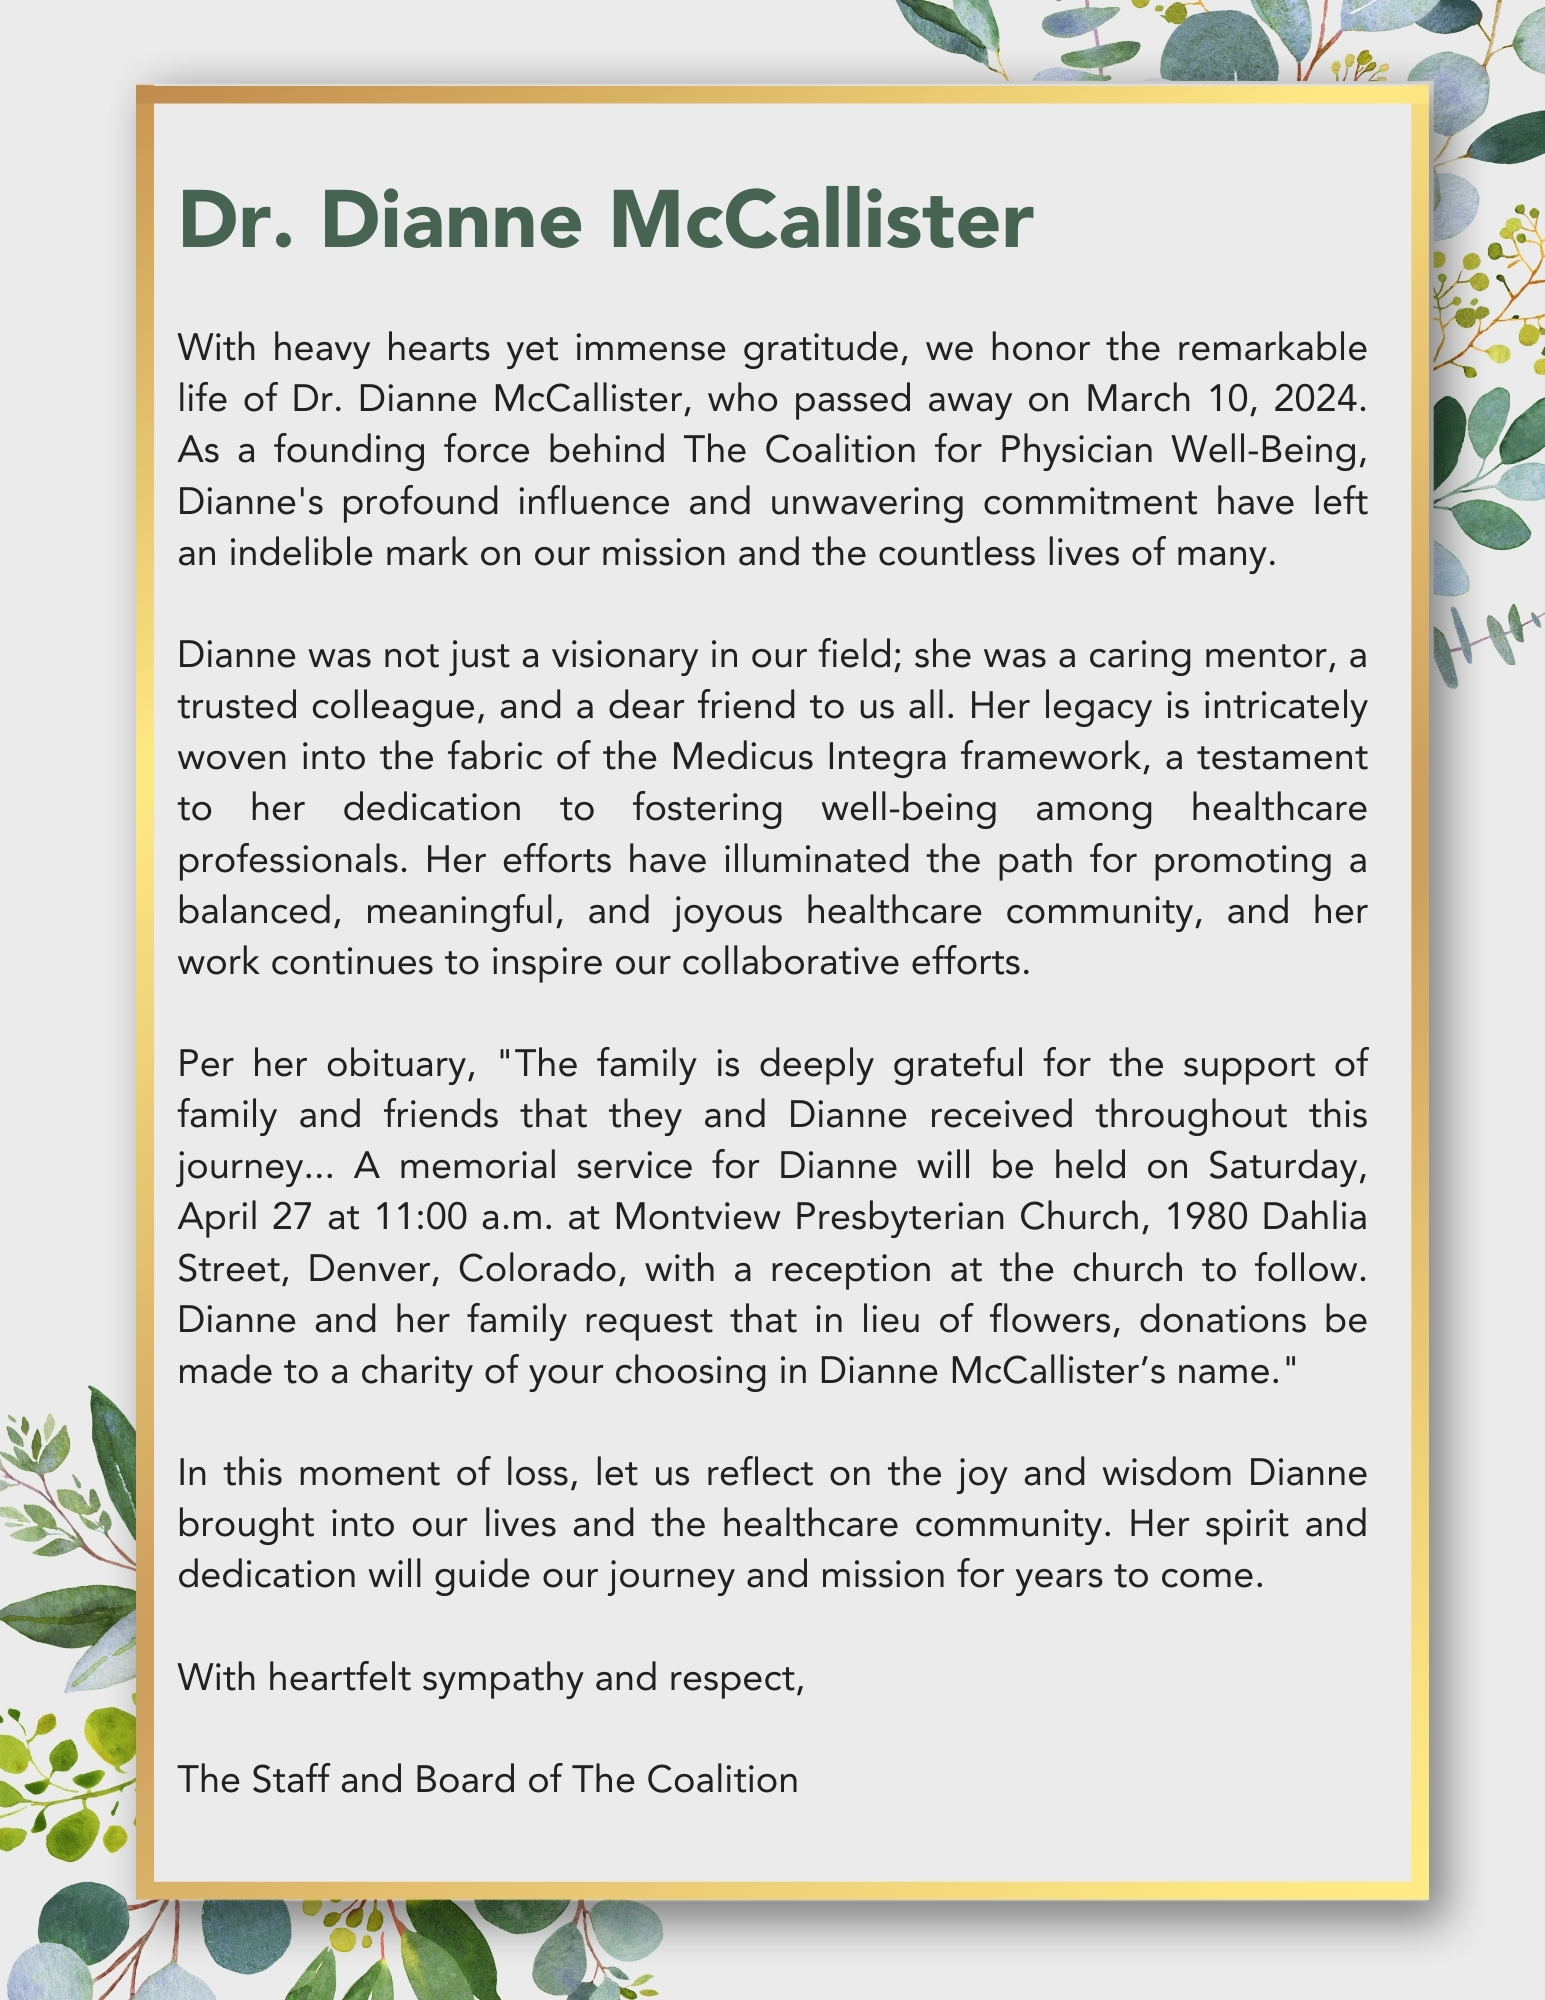 Dr. Dianne McCallister  With heavy hearts yet immense gratitude, we honor the remarkable life of Dr. Dianne McCallister, who passed away on March 10, 2024. As a founding force behind The Coalition for Physician Well-Being, Dianne's profound influence and unwavering commitment have left an indelible mark on our mission and the countless lives of many.  Dianne was not just a visionary in our field; she was a caring mentor, a trusted colleague, and a dear friend to us all. Her legacy is intricately woven into the fabric of the Medicus Integra framework, a testament to her dedication to fostering well-being among healthcare professionals. Her efforts have illuminated the path for promoting a balanced, meaningful, and joyous healthcare community, and her work continues to inspire our collaborative efforts.  Per her obituary, "The family is deeply grateful for the support of family and friends that they and Dianne received throughout this journey... A memorial service for Dianne will be held on Saturday, April 27 at 11:00 a.m. at Montview Presbyterian Church, 1980 Dahlia Street, Denver, Colorado, with a reception at the church to follow. Dianne and her family request that in lieu of flowers, donations be made to a charity of your choosing in Dianne McCallister’s name."  In this moment of loss, let us reflect on the joy and wisdom Dianne brought into our lives and the healthcare community. Her spirit and dedication will guide our journey and mission for years to come.  With heartfelt sympathy and respect,  The Staff and Board of The Coalition